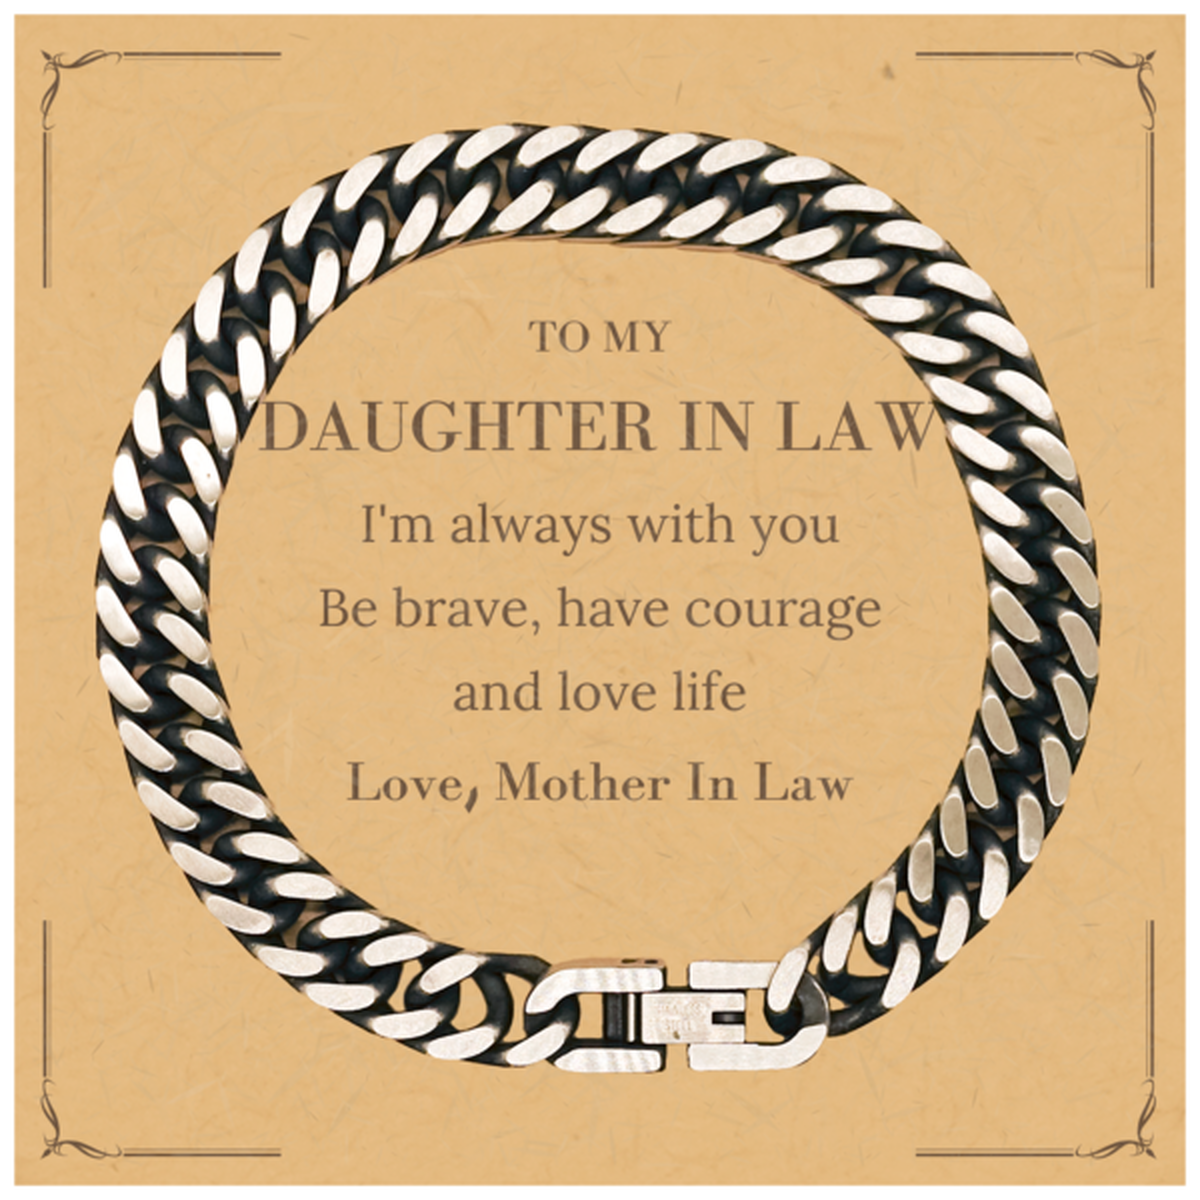 To My Daughter In Law Gifts from Mother In Law, Unique Cuban Link Chain Bracelet Inspirational Christmas Birthday Graduation Gifts for Daughter In Law I'm always with you. Be brave, have courage and love life. Love, Mother In Law